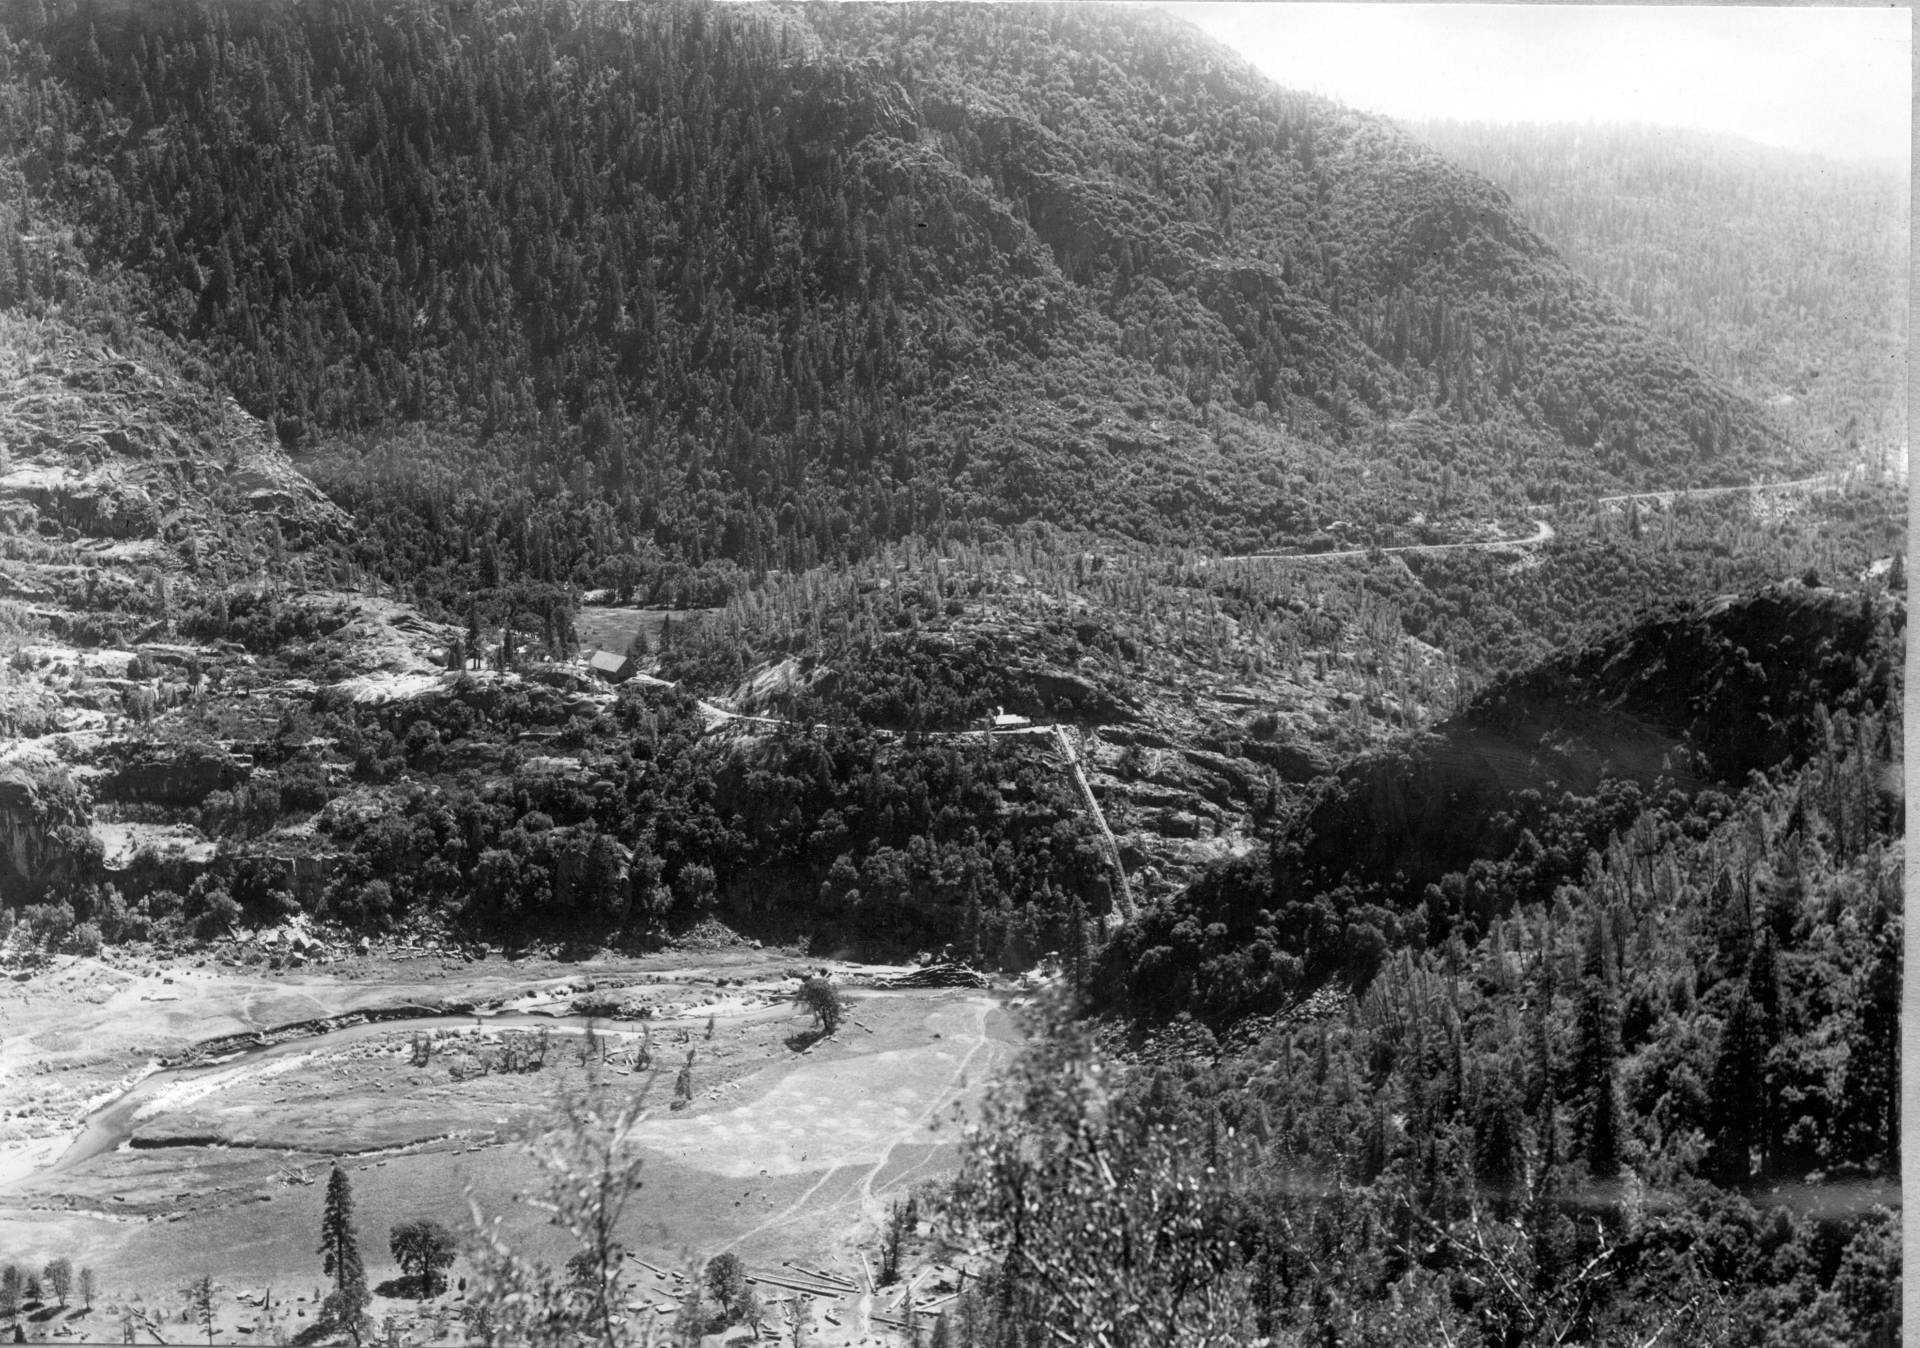 	
View across Hetch Hetchy Valley, early 1900s, from the southwestern end, showing the Tuolumne River flowing through the lower portion of the valley prior to damming. Isaiah West Taber/ Sierra Club Bulletin/ Public Domain